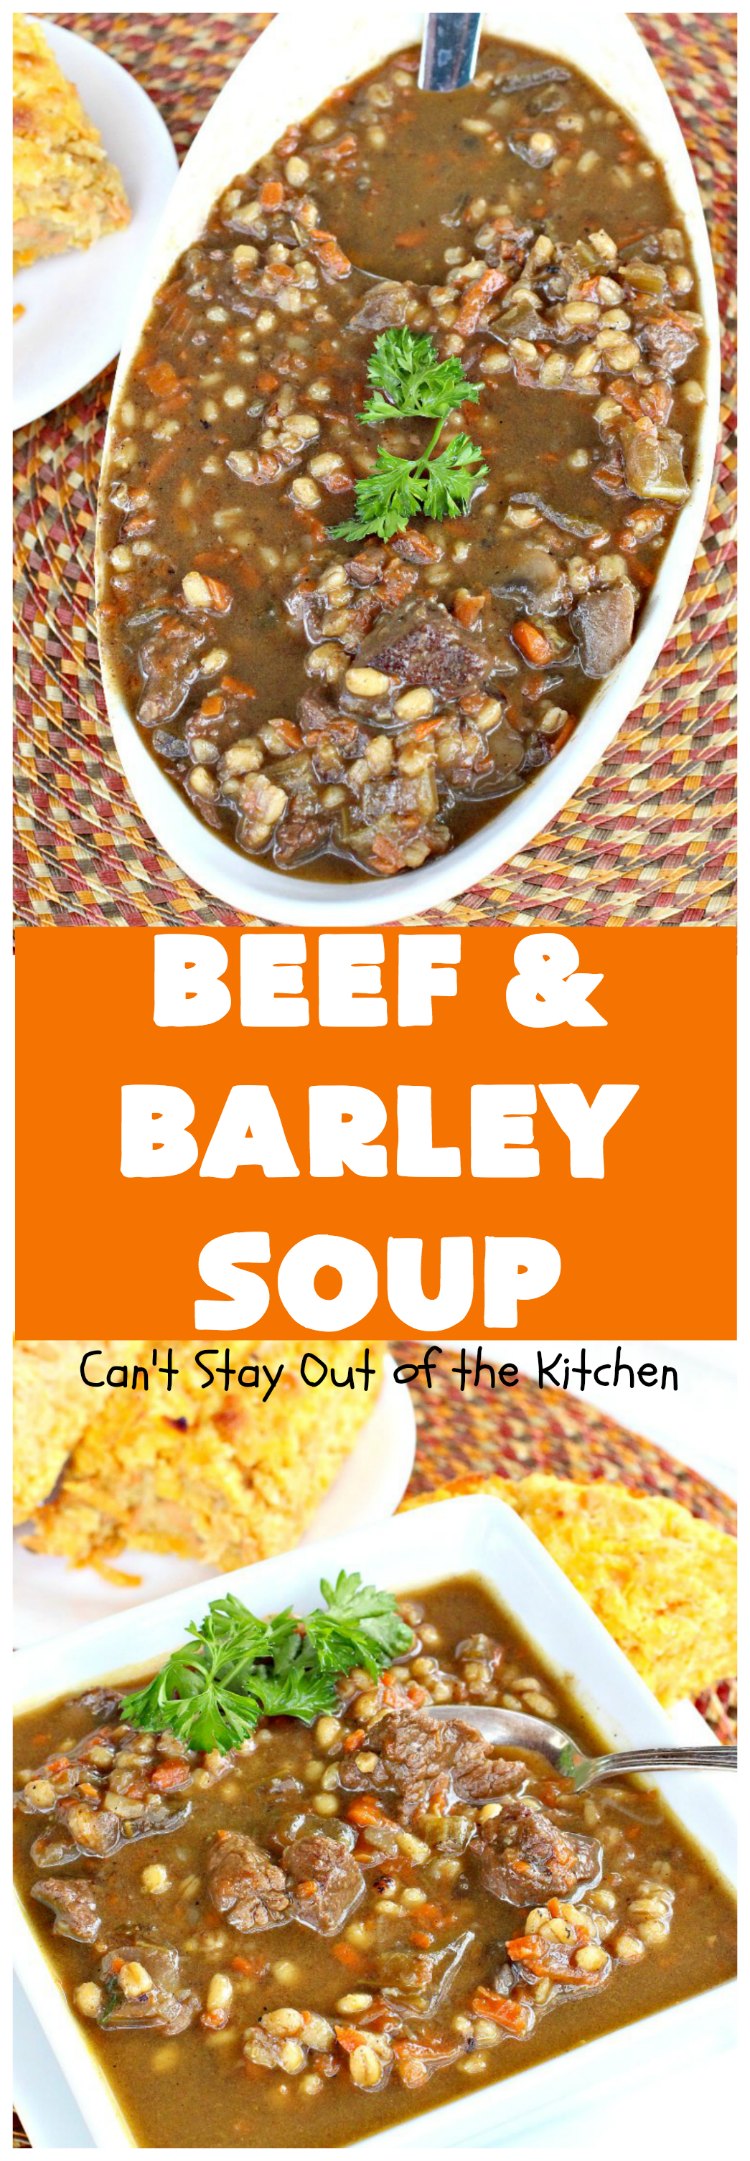 Beef & Barley Soup | Can't Stay Out of the Kitchen